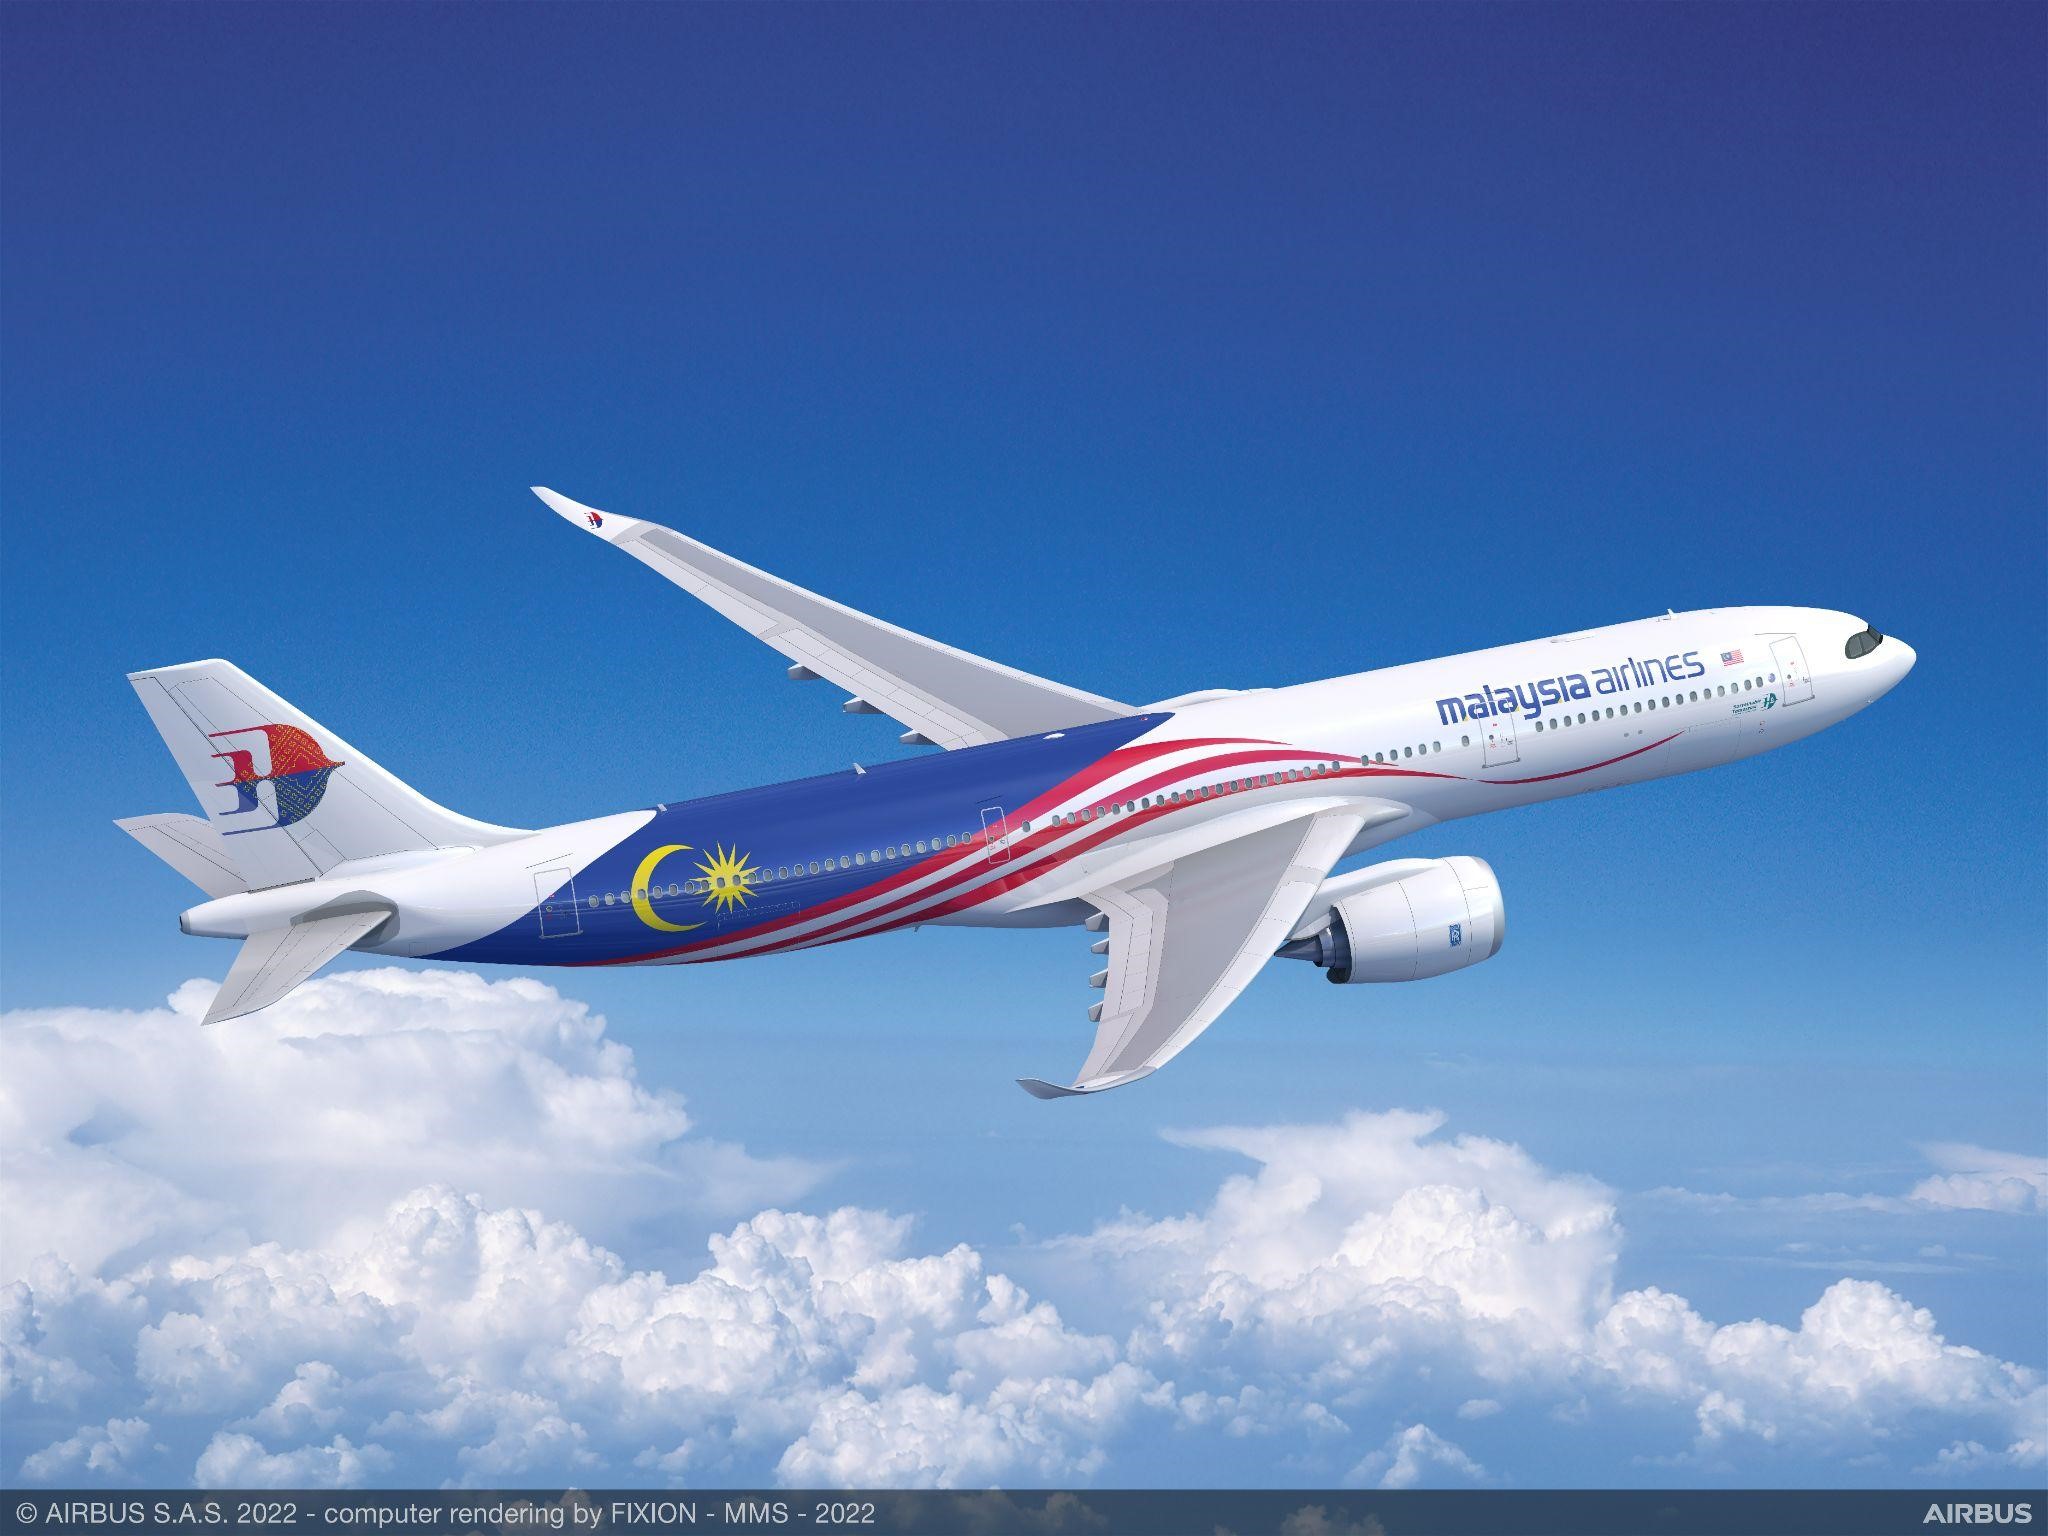 Malaysia Airlines to acquire 20 A330neos for widebody fleet renewal